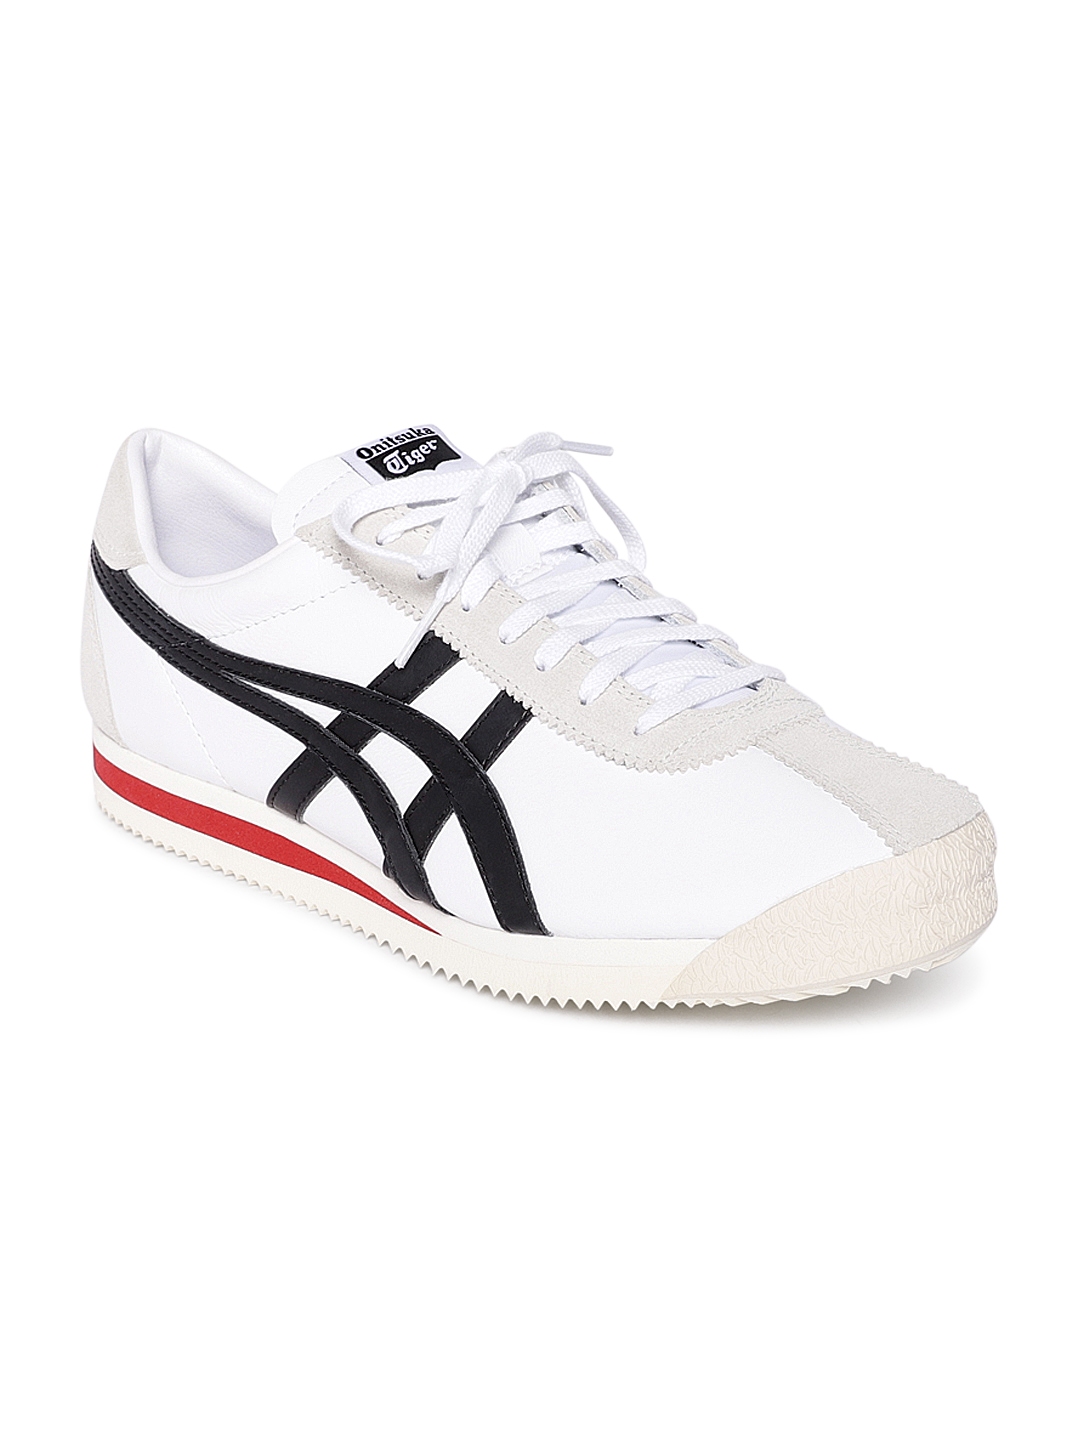 Buy Onitsuka Tiger Corsair - Casual Shoes for Unisex 10505692 | Myntra